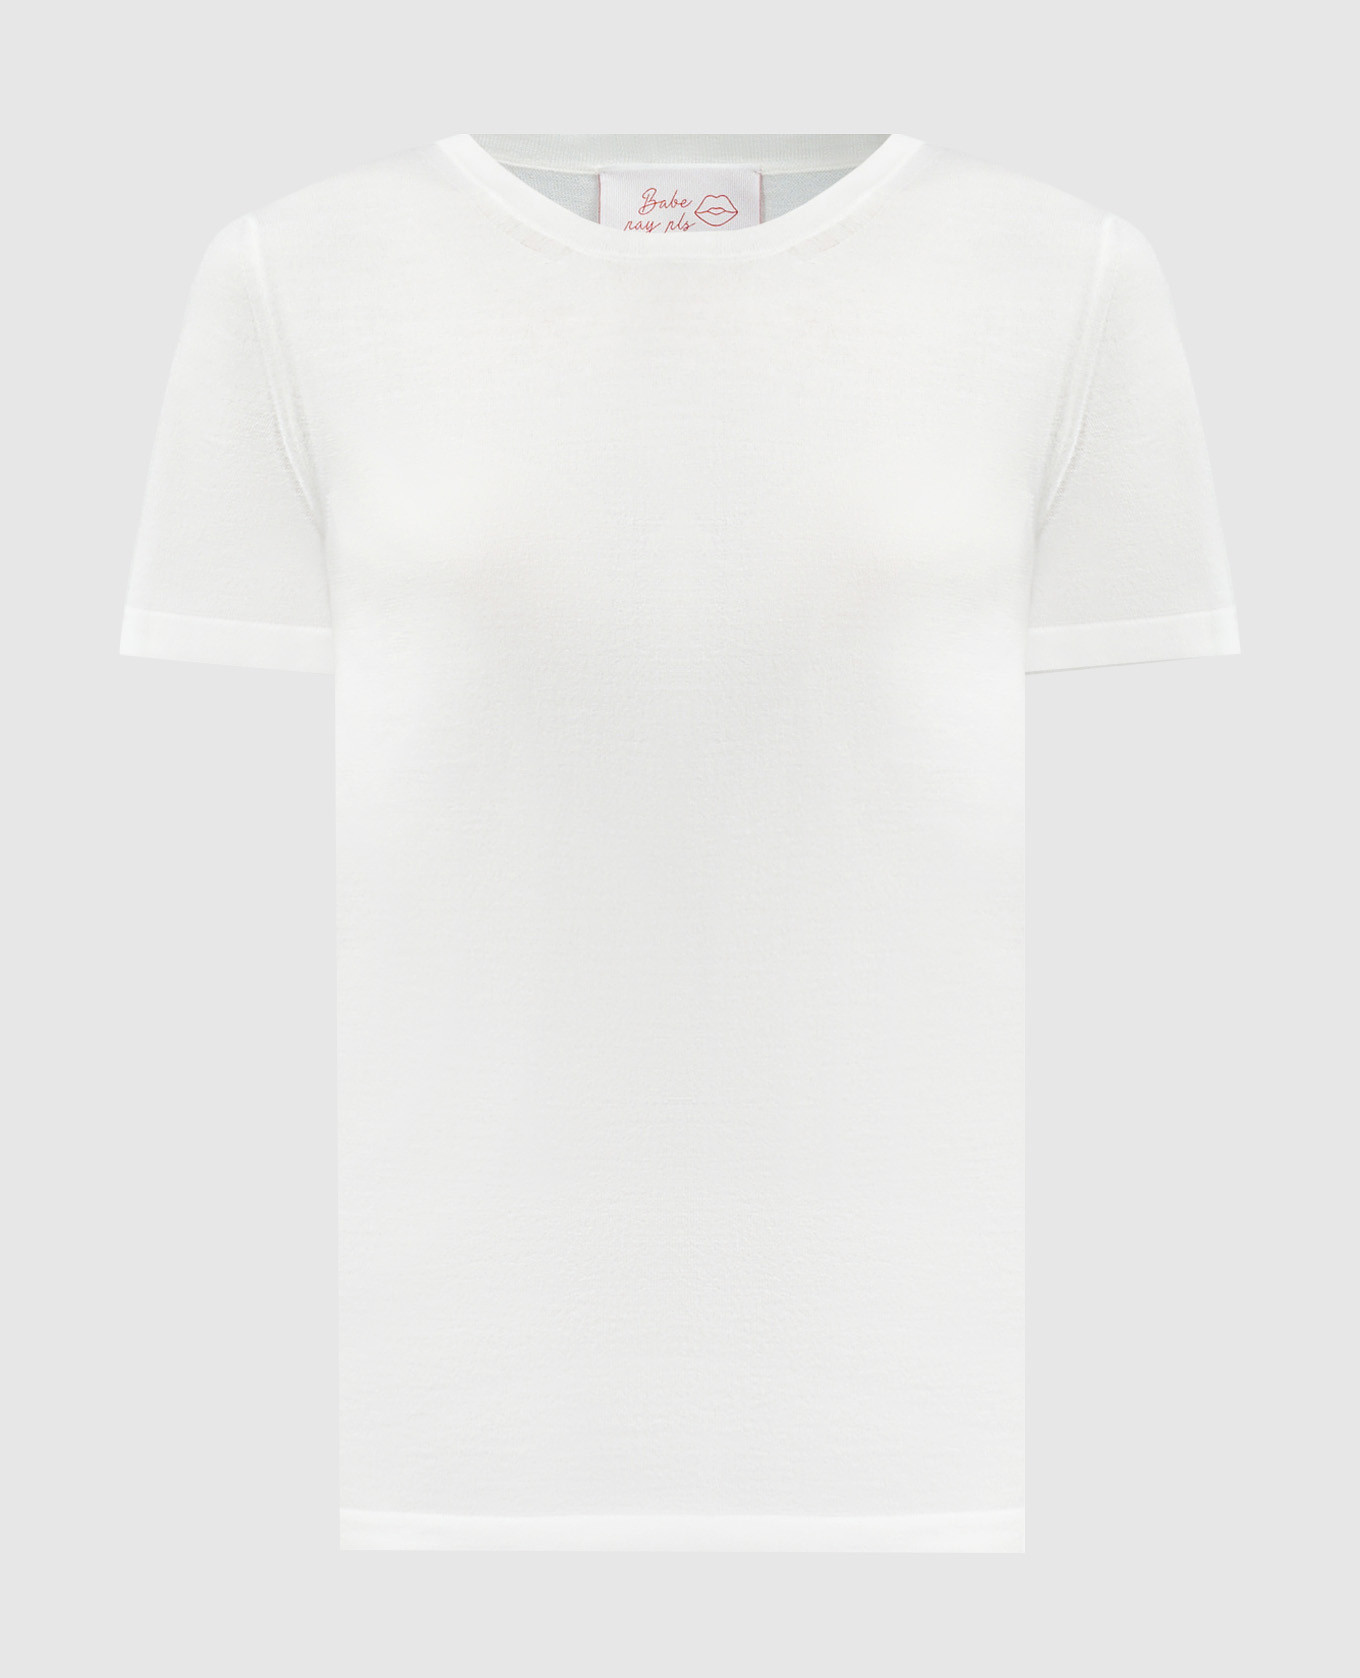 White T-shirt made of wool, silk and cashmere